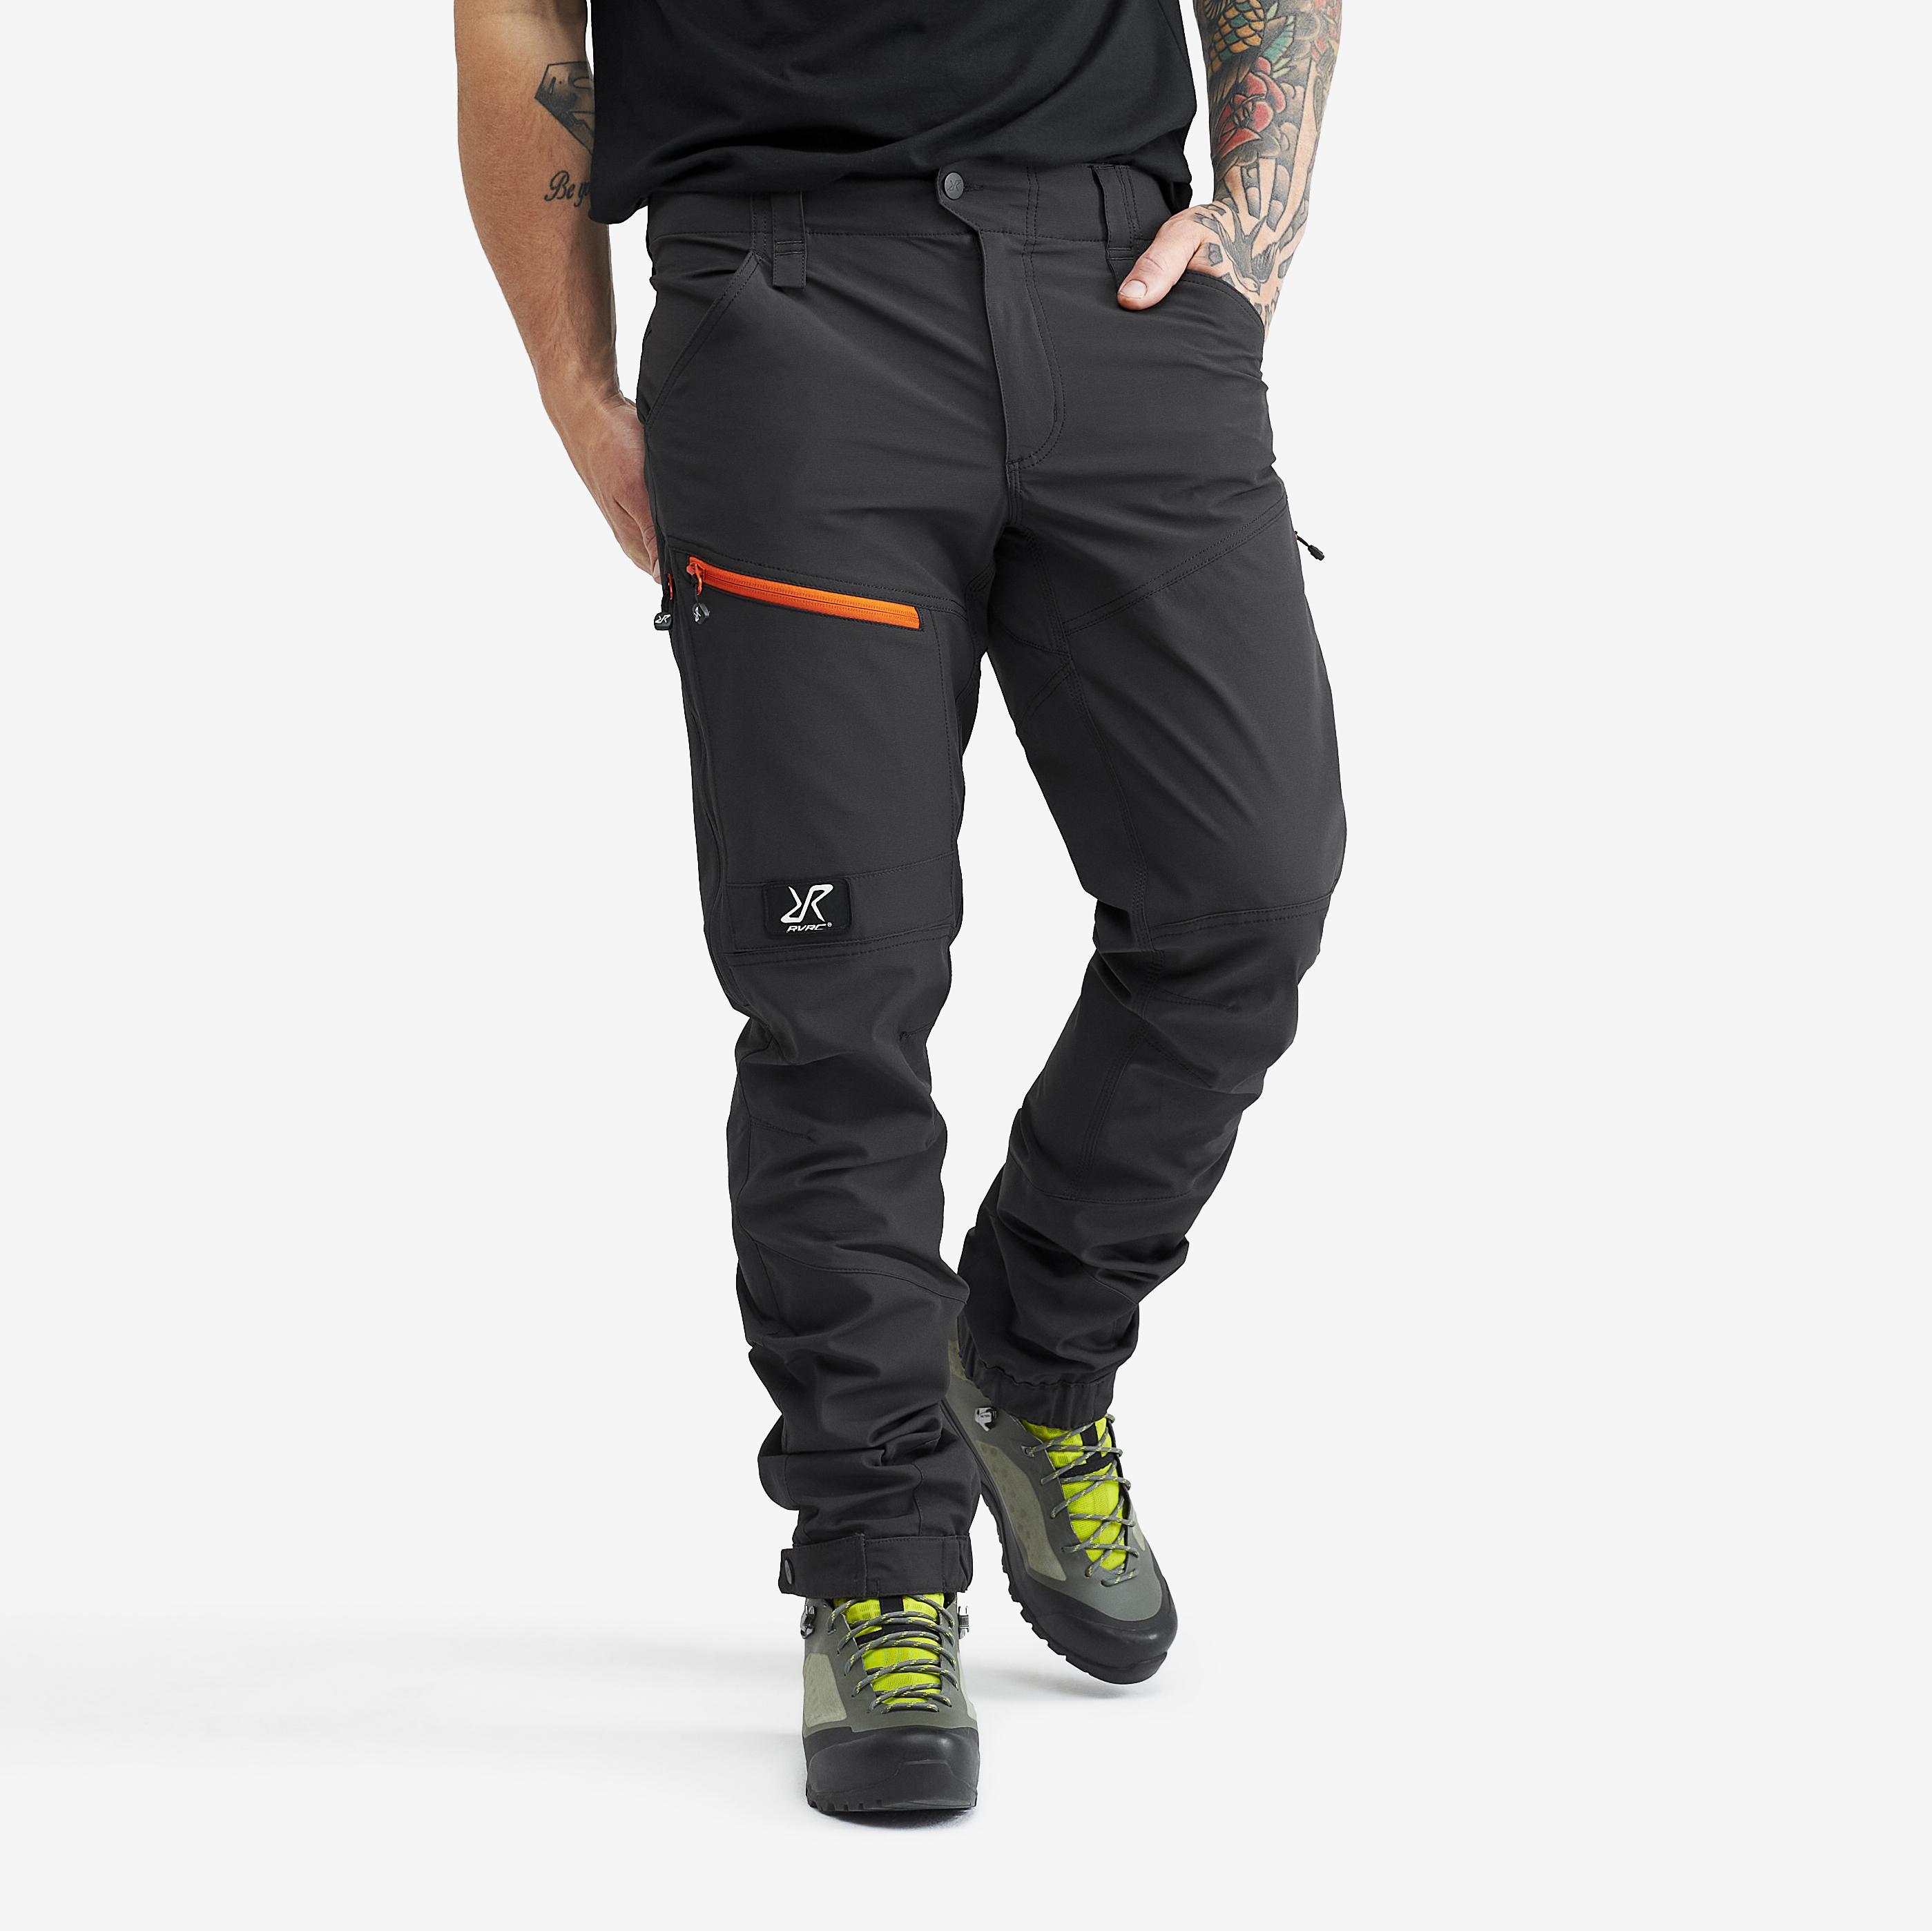 Silence Pants Anthracite